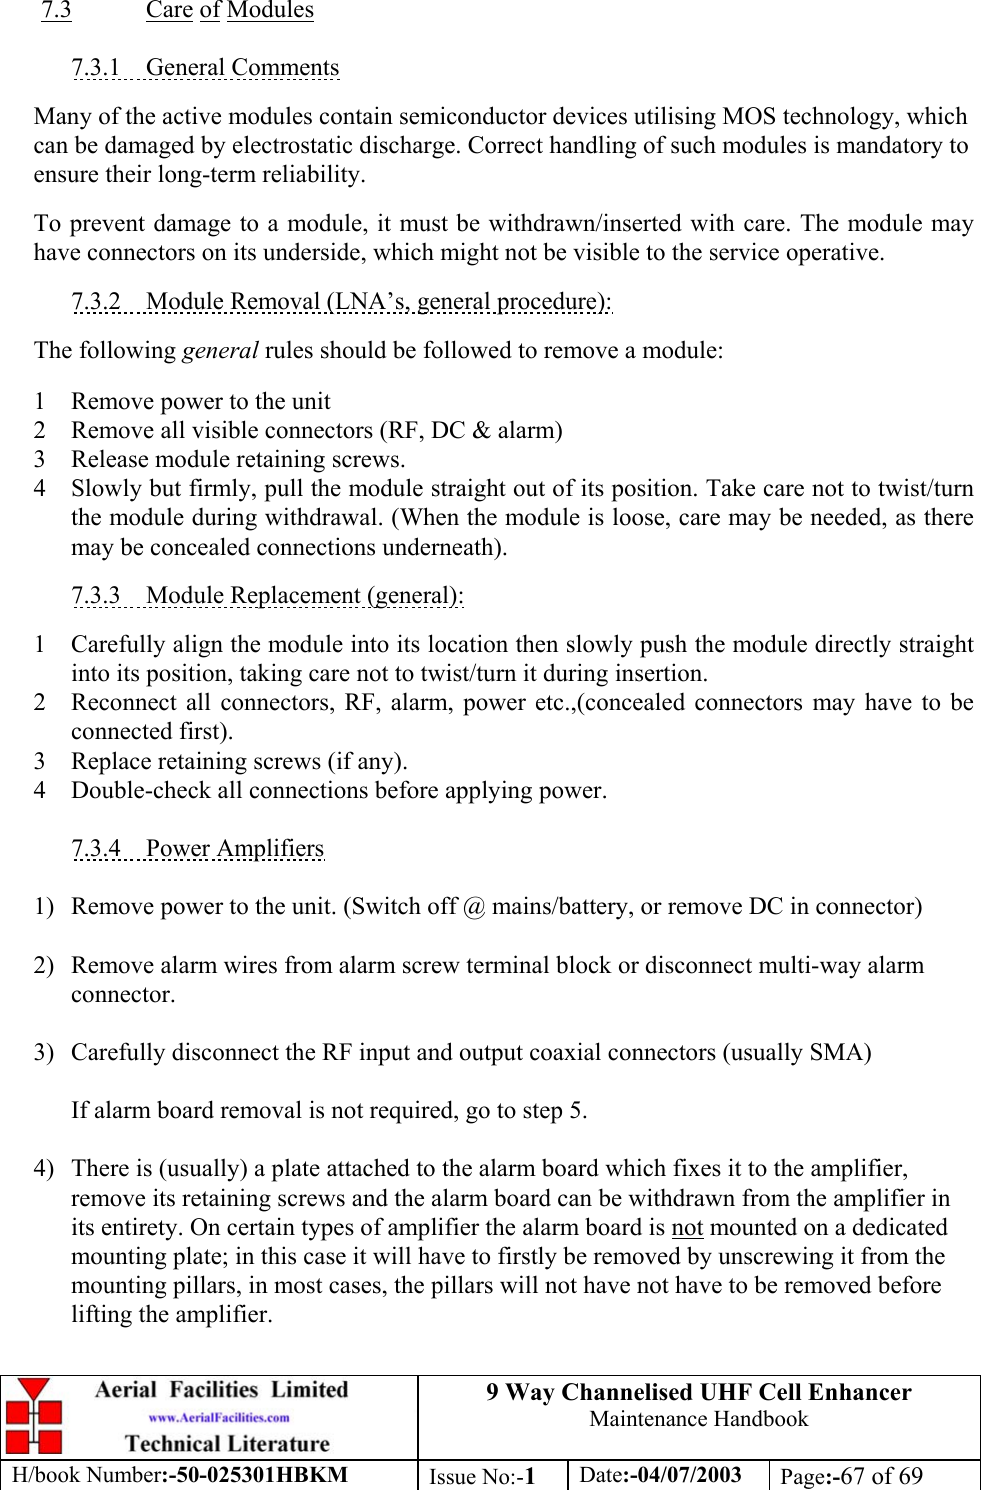 9 Way Channelised UHF Cell EnhancerMaintenance HandbookH/book Number:-50-025301HBKM Issue No:-1Date:-04/07/2003 Page:-67 of 697.3 Care of Modules7.3.1    General CommentsMany of the active modules contain semiconductor devices utilising MOS technology, whichcan be damaged by electrostatic discharge. Correct handling of such modules is mandatory toensure their long-term reliability.To prevent damage to a module, it must be withdrawn/inserted with care. The module mayhave connectors on its underside, which might not be visible to the service operative.7.3.2    Module Removal (LNA’s, general procedure):The following general rules should be followed to remove a module:1 Remove power to the unit2 Remove all visible connectors (RF, DC &amp; alarm)3 Release module retaining screws.4 Slowly but firmly, pull the module straight out of its position. Take care not to twist/turnthe module during withdrawal. (When the module is loose, care may be needed, as theremay be concealed connections underneath).7.3.3    Module Replacement (general):1 Carefully align the module into its location then slowly push the module directly straightinto its position, taking care not to twist/turn it during insertion.2 Reconnect all connectors, RF, alarm, power etc.,(concealed connectors may have to beconnected first).3 Replace retaining screws (if any).4 Double-check all connections before applying power.7.3.4    Power Amplifiers1) Remove power to the unit. (Switch off @ mains/battery, or remove DC in connector)2) Remove alarm wires from alarm screw terminal block or disconnect multi-way alarmconnector.3) Carefully disconnect the RF input and output coaxial connectors (usually SMA)If alarm board removal is not required, go to step 5.4) There is (usually) a plate attached to the alarm board which fixes it to the amplifier,remove its retaining screws and the alarm board can be withdrawn from the amplifier inits entirety. On certain types of amplifier the alarm board is not mounted on a dedicatedmounting plate; in this case it will have to firstly be removed by unscrewing it from themounting pillars, in most cases, the pillars will not have not have to be removed beforelifting the amplifier.